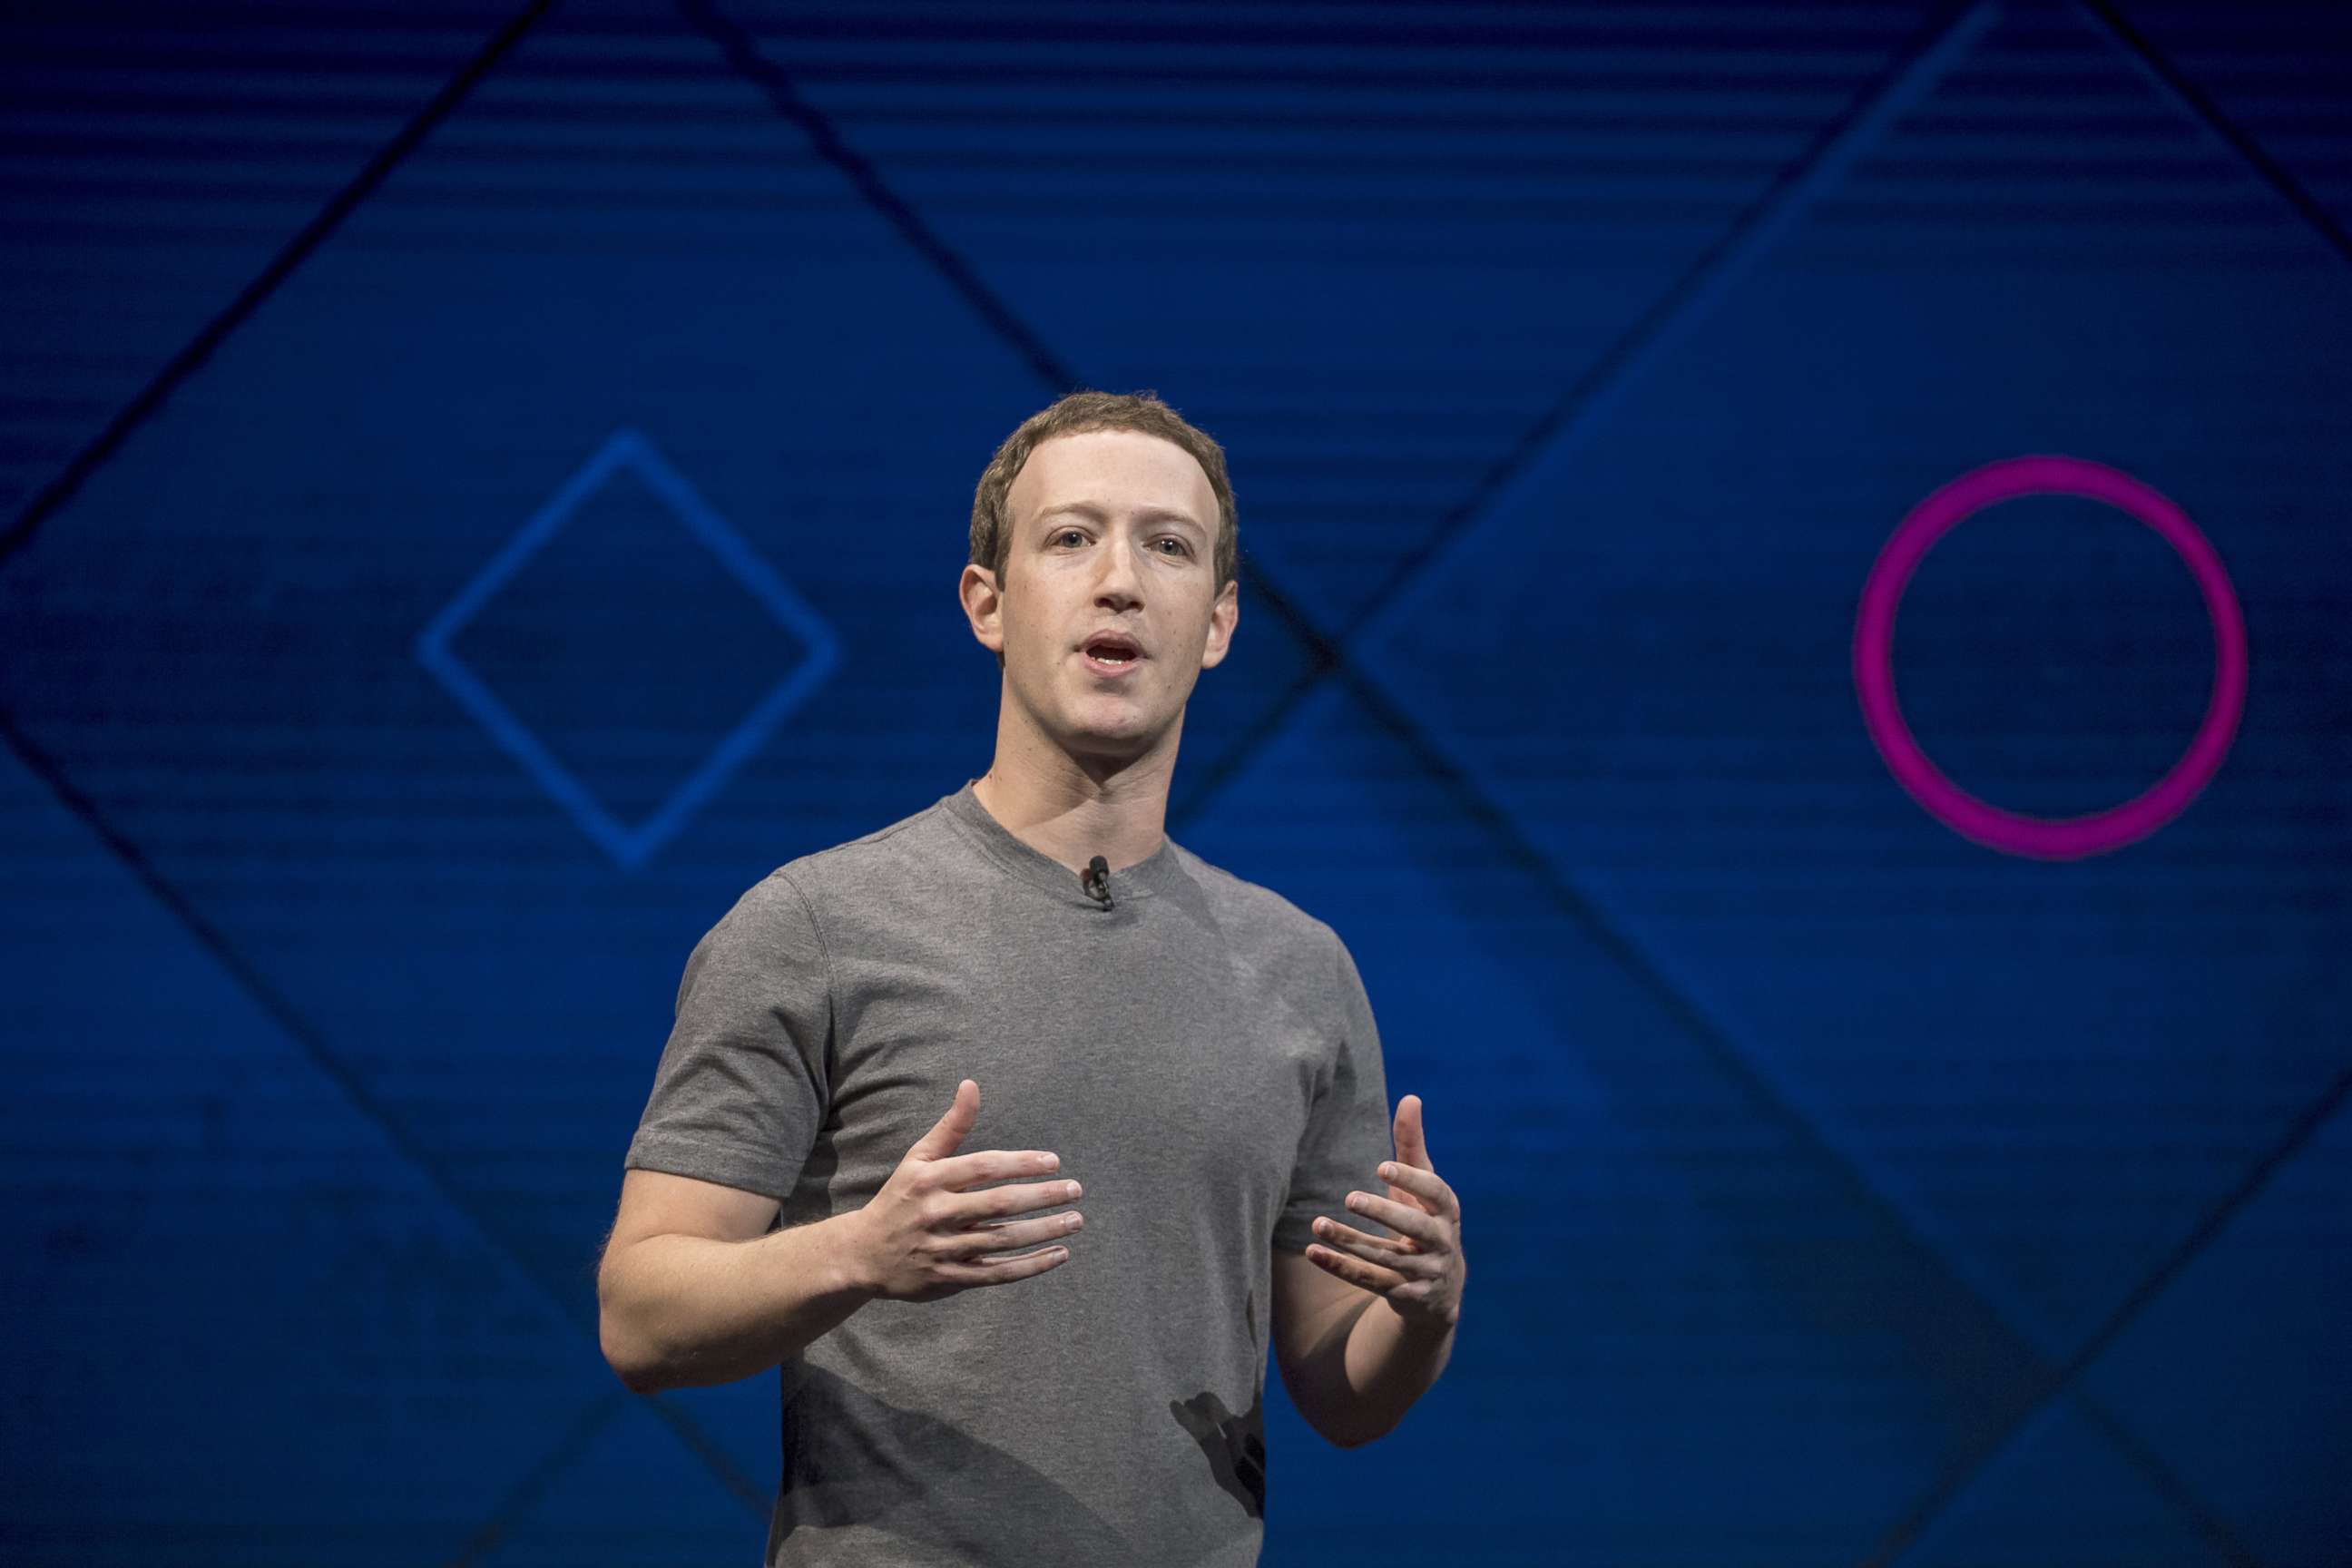 PHOTO: Mark Zuckerberg, chief executive officer and founder of Facebook Inc., speaks during the F8 Developers Conference in San Jose, Calif., April 18, 2017. 